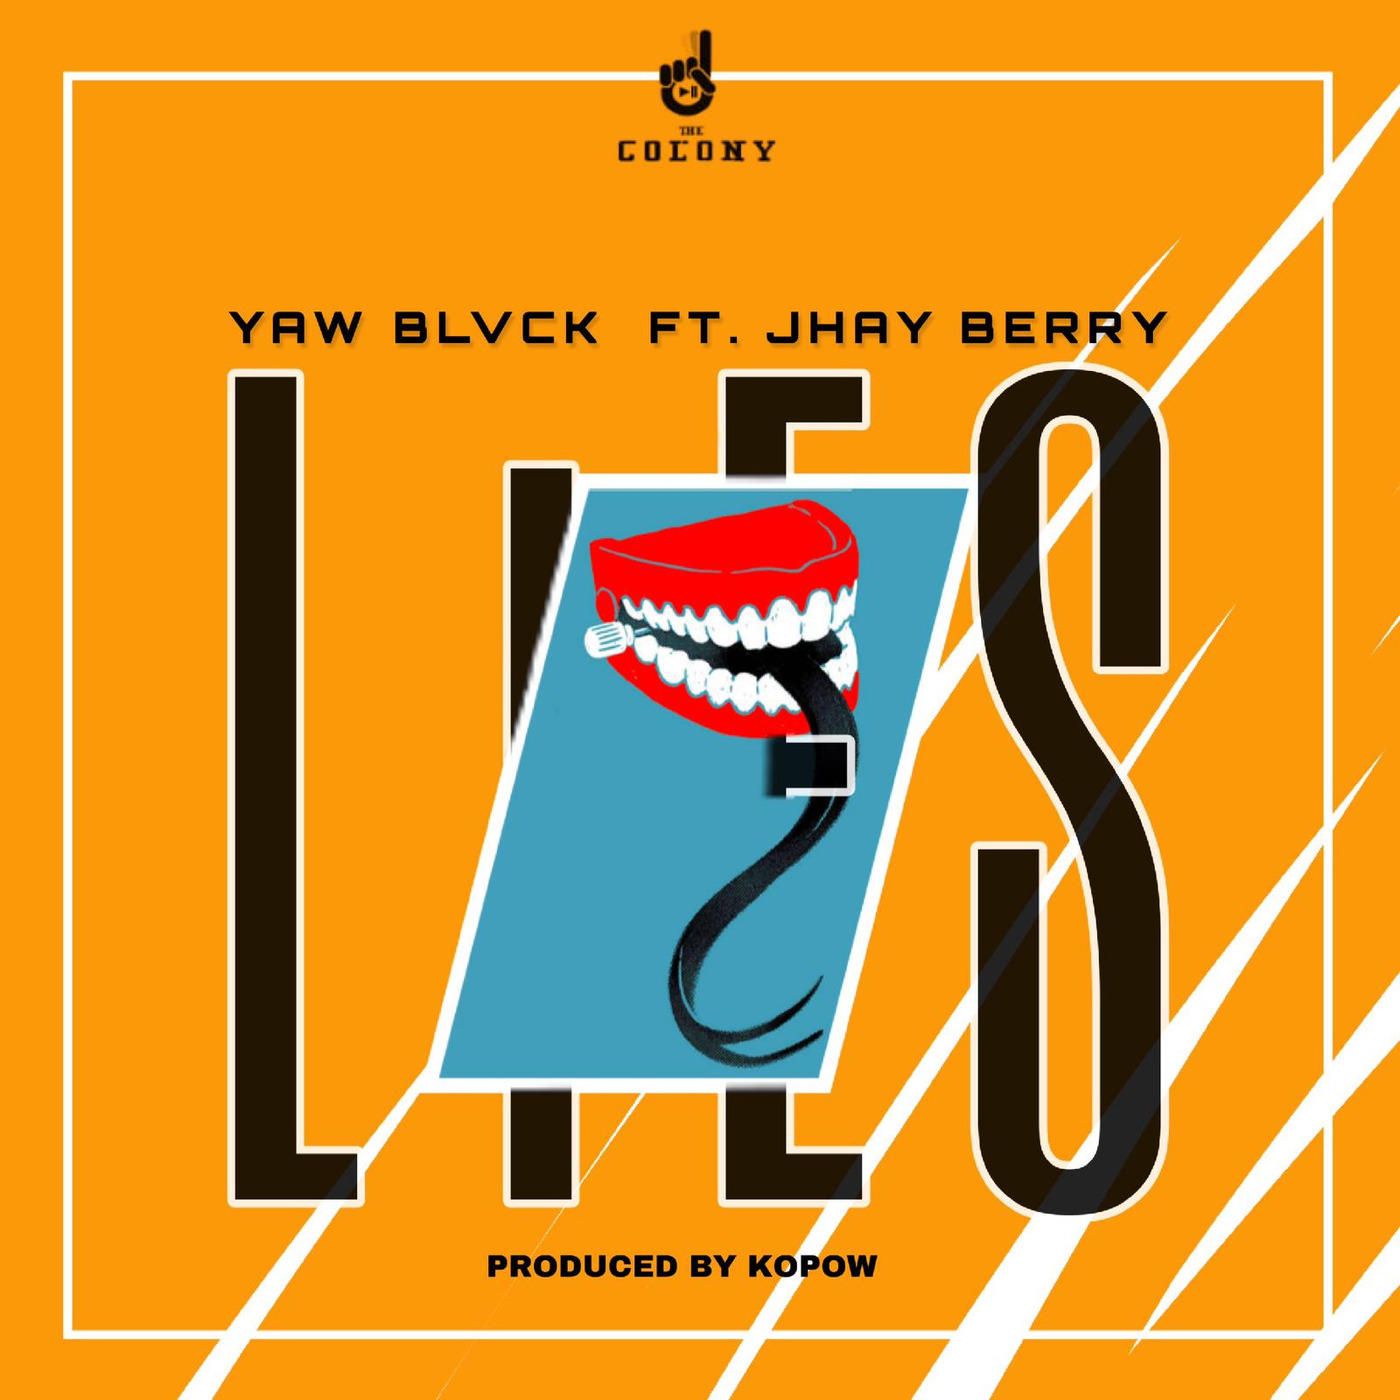 Yaw Blvck - Lies Feat Jhay Berry (Produced by Kopow)